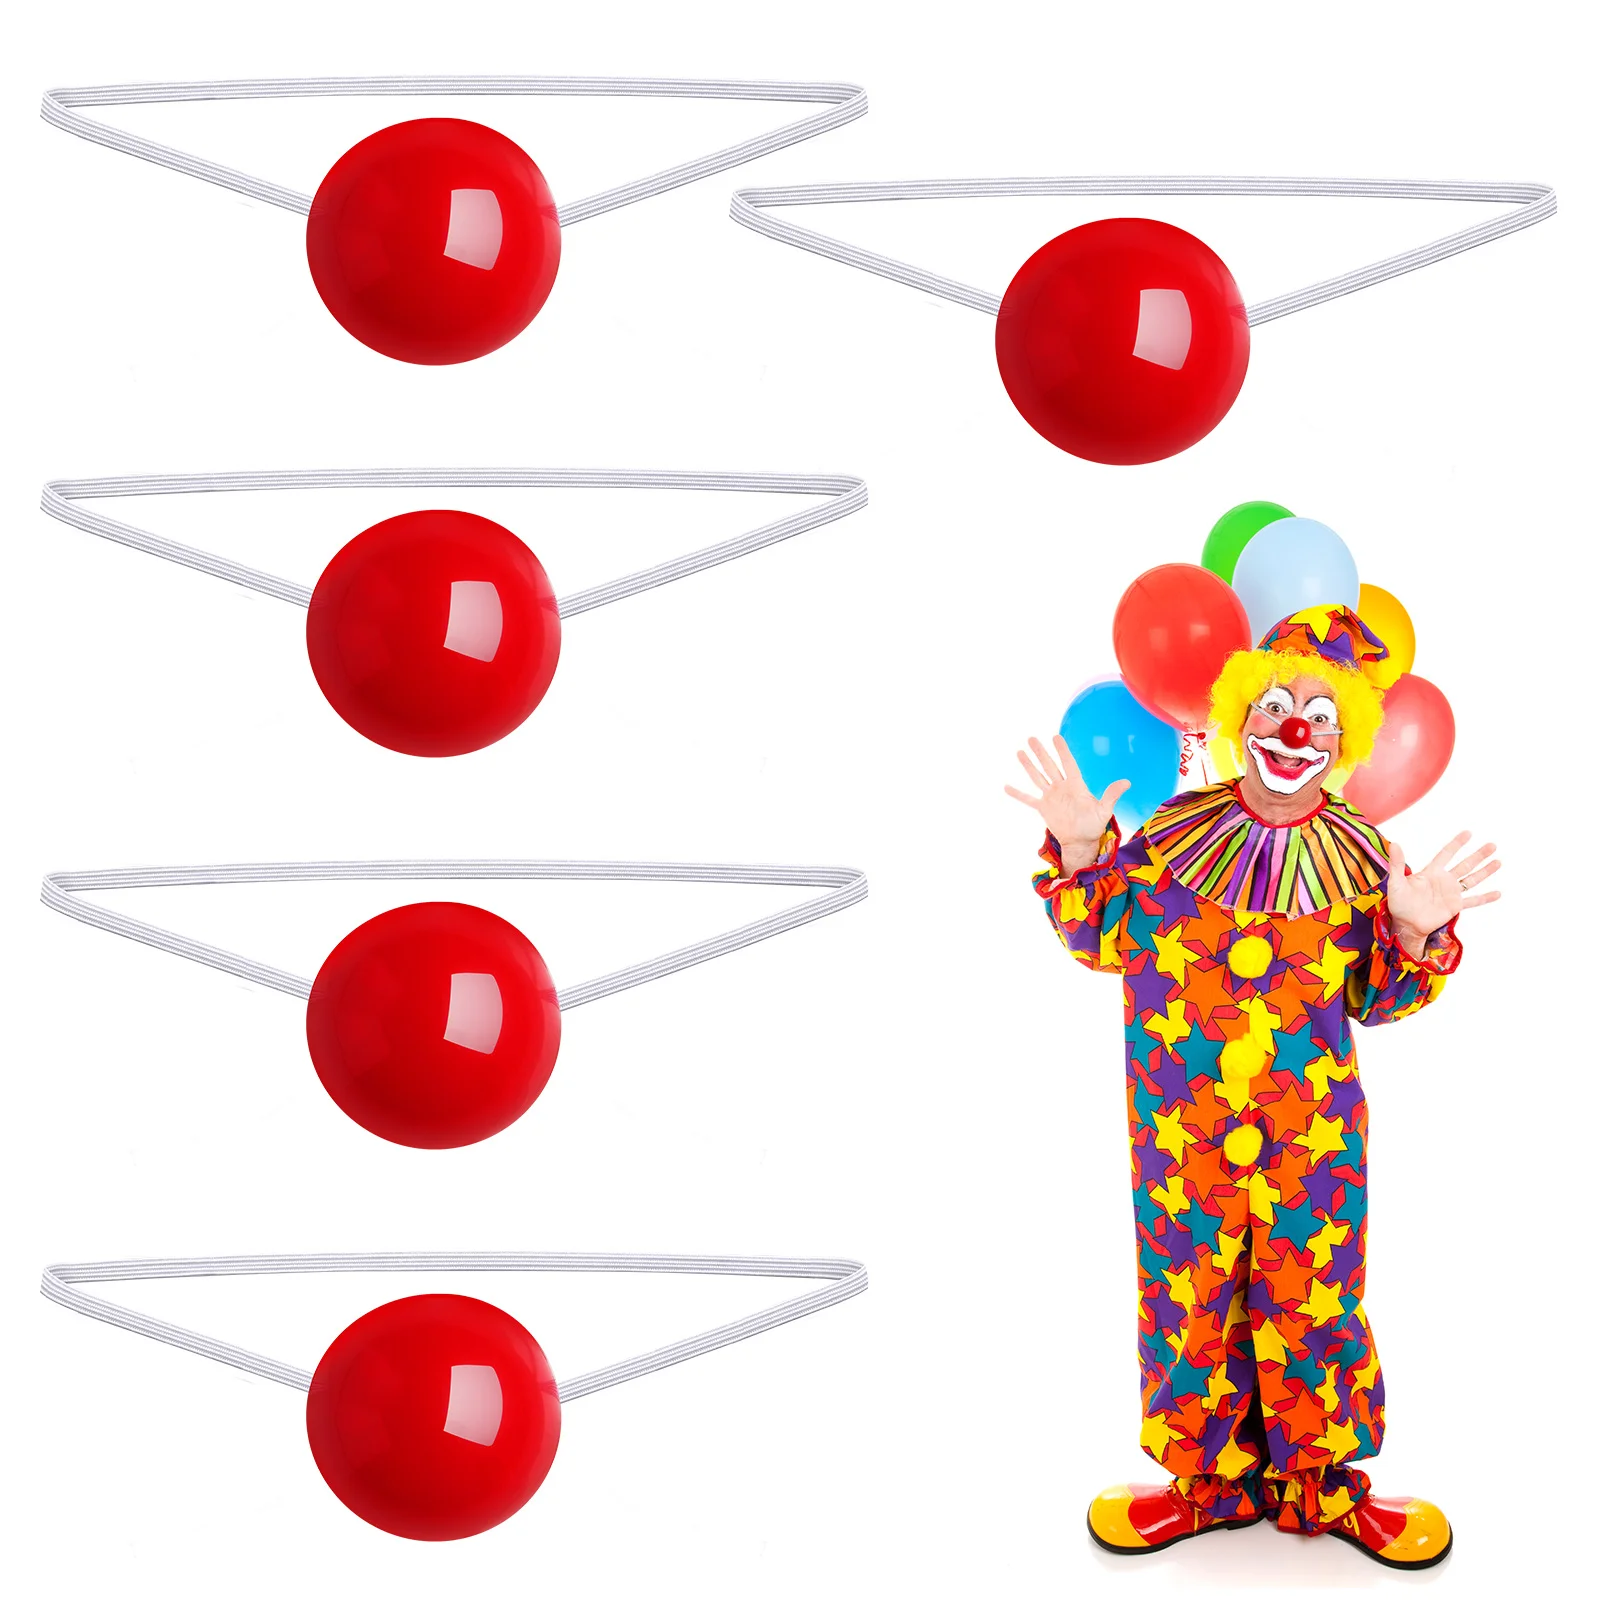 

Clown Red Nose Glowing Noses Light Up Christmas Reindeer Dress Up Props Stage Performance Halloween Costume Party Cosplay